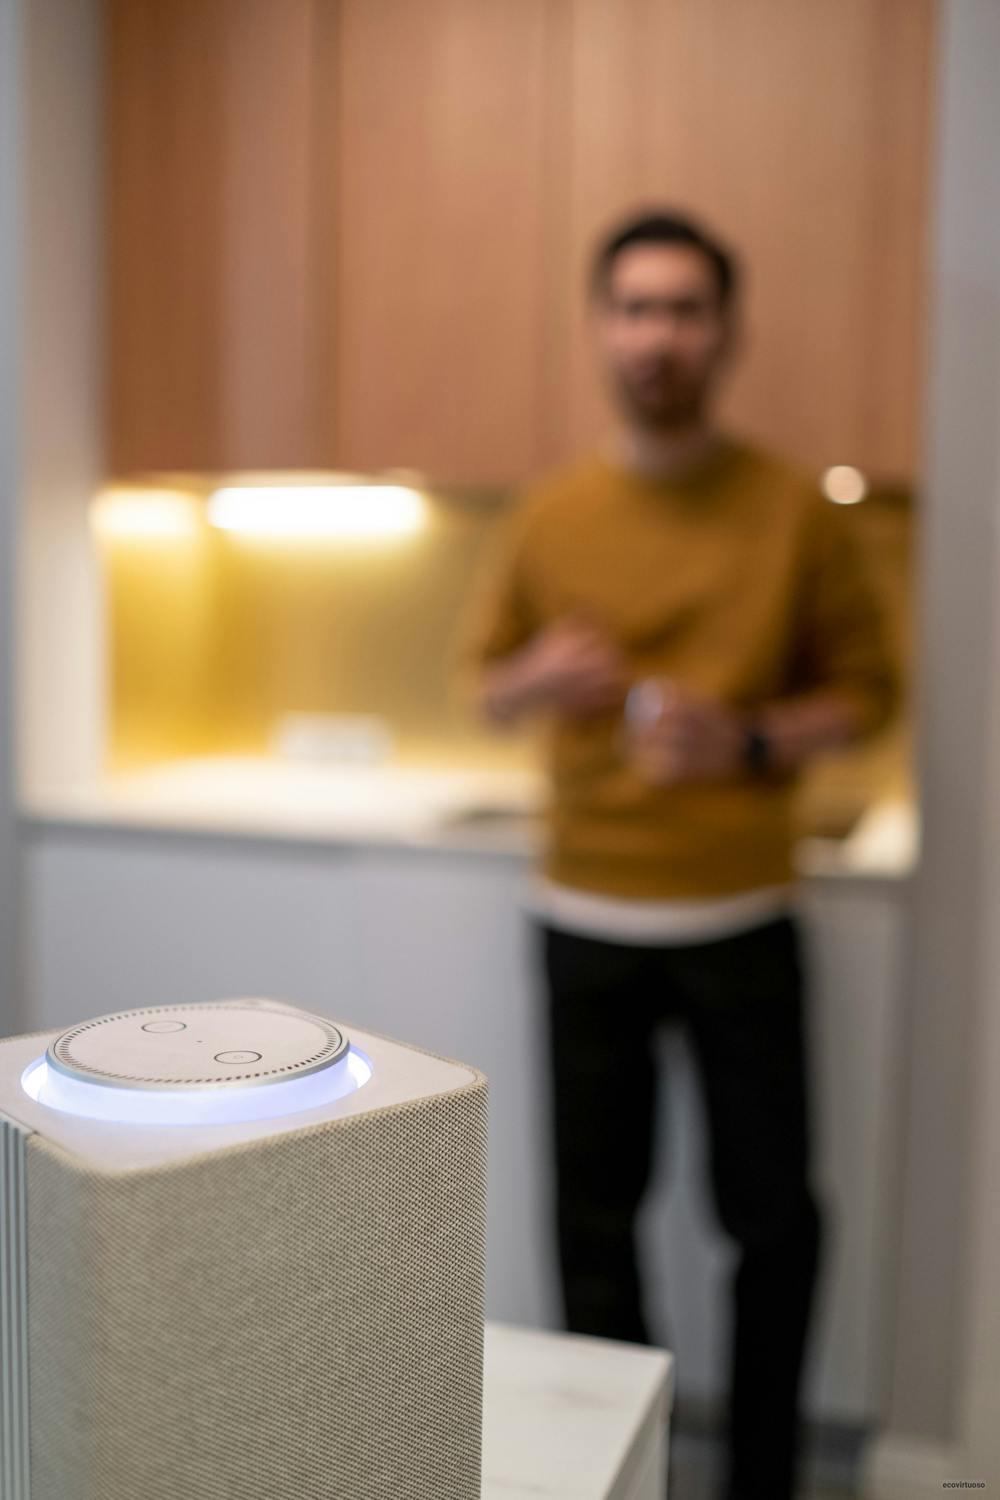 Man Standing in a Kitchen with a White Smart Speaker